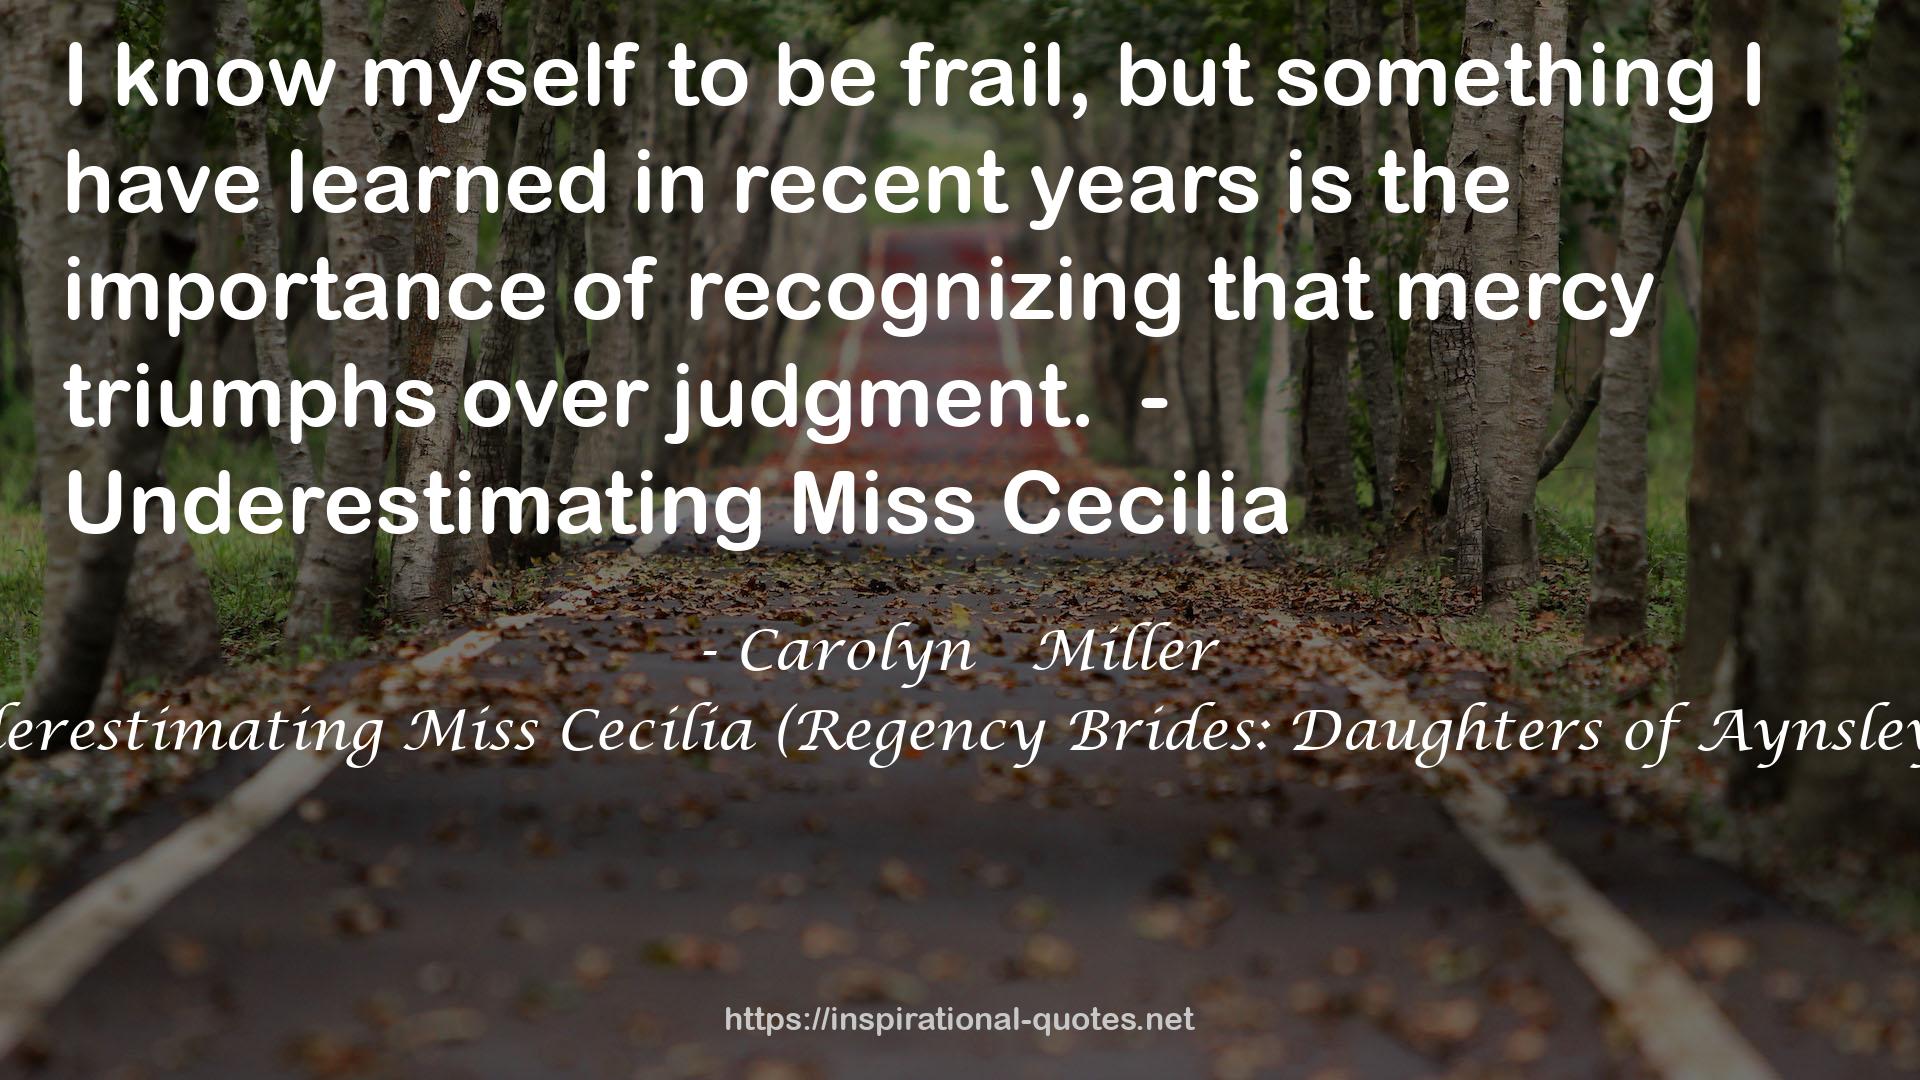 Underestimating Miss Cecilia (Regency Brides: Daughters of Aynsley #2) QUOTES